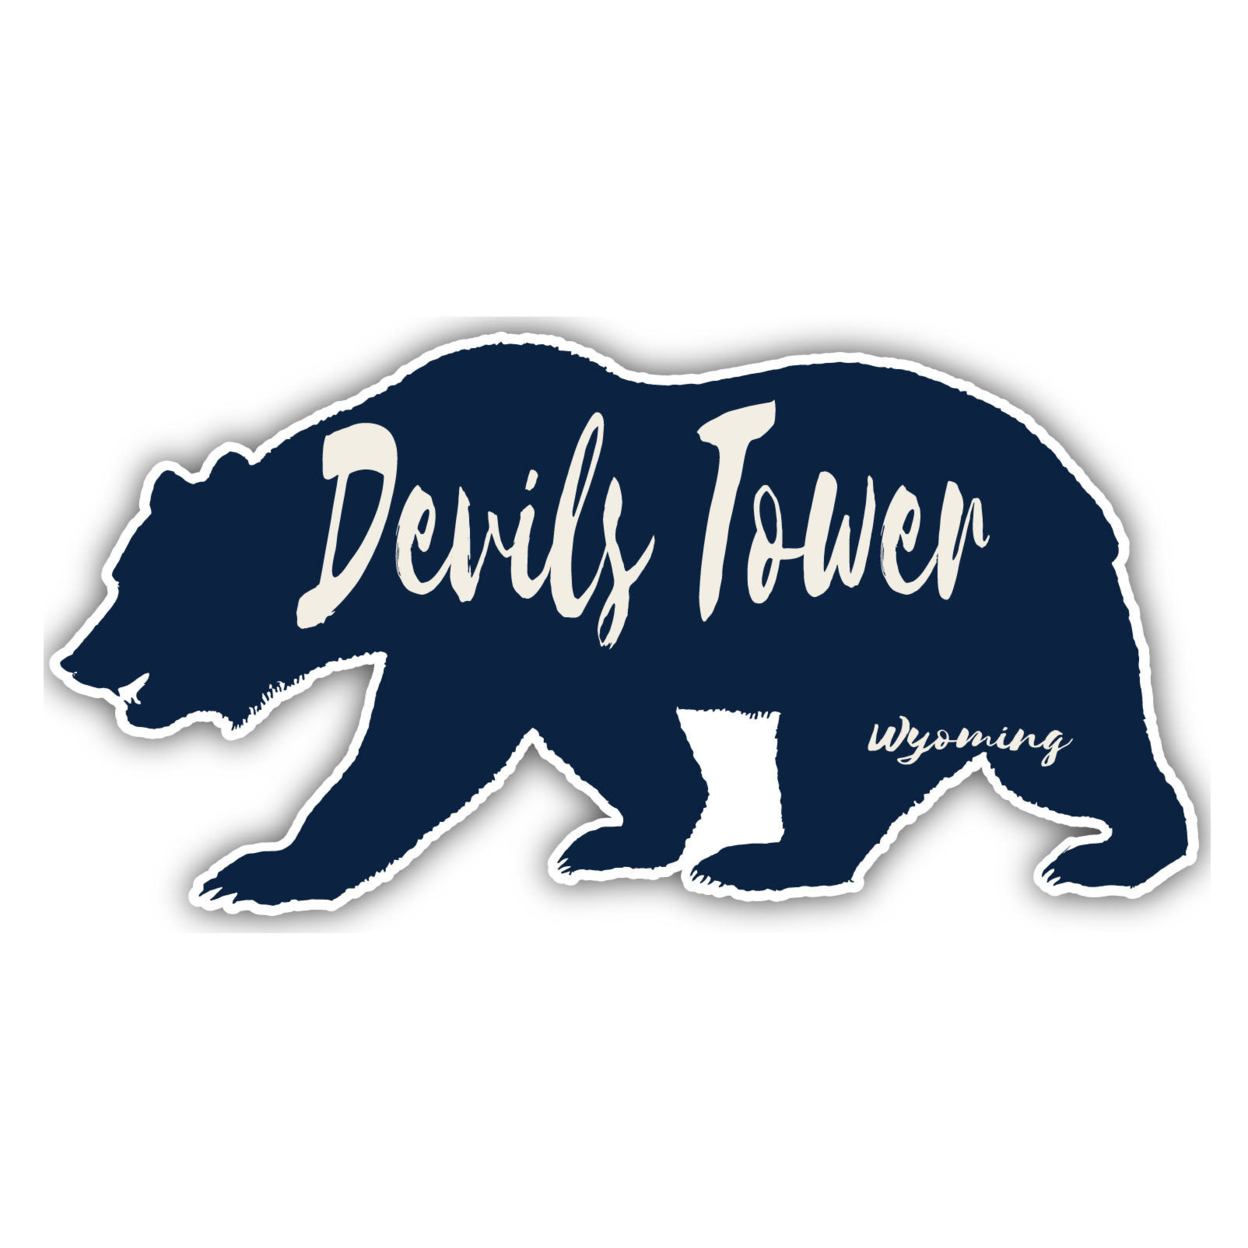 Devils Tower Wyoming Souvenir Decorative Stickers (Choose Theme And Size) - 4-Pack, 12-Inch, Tent